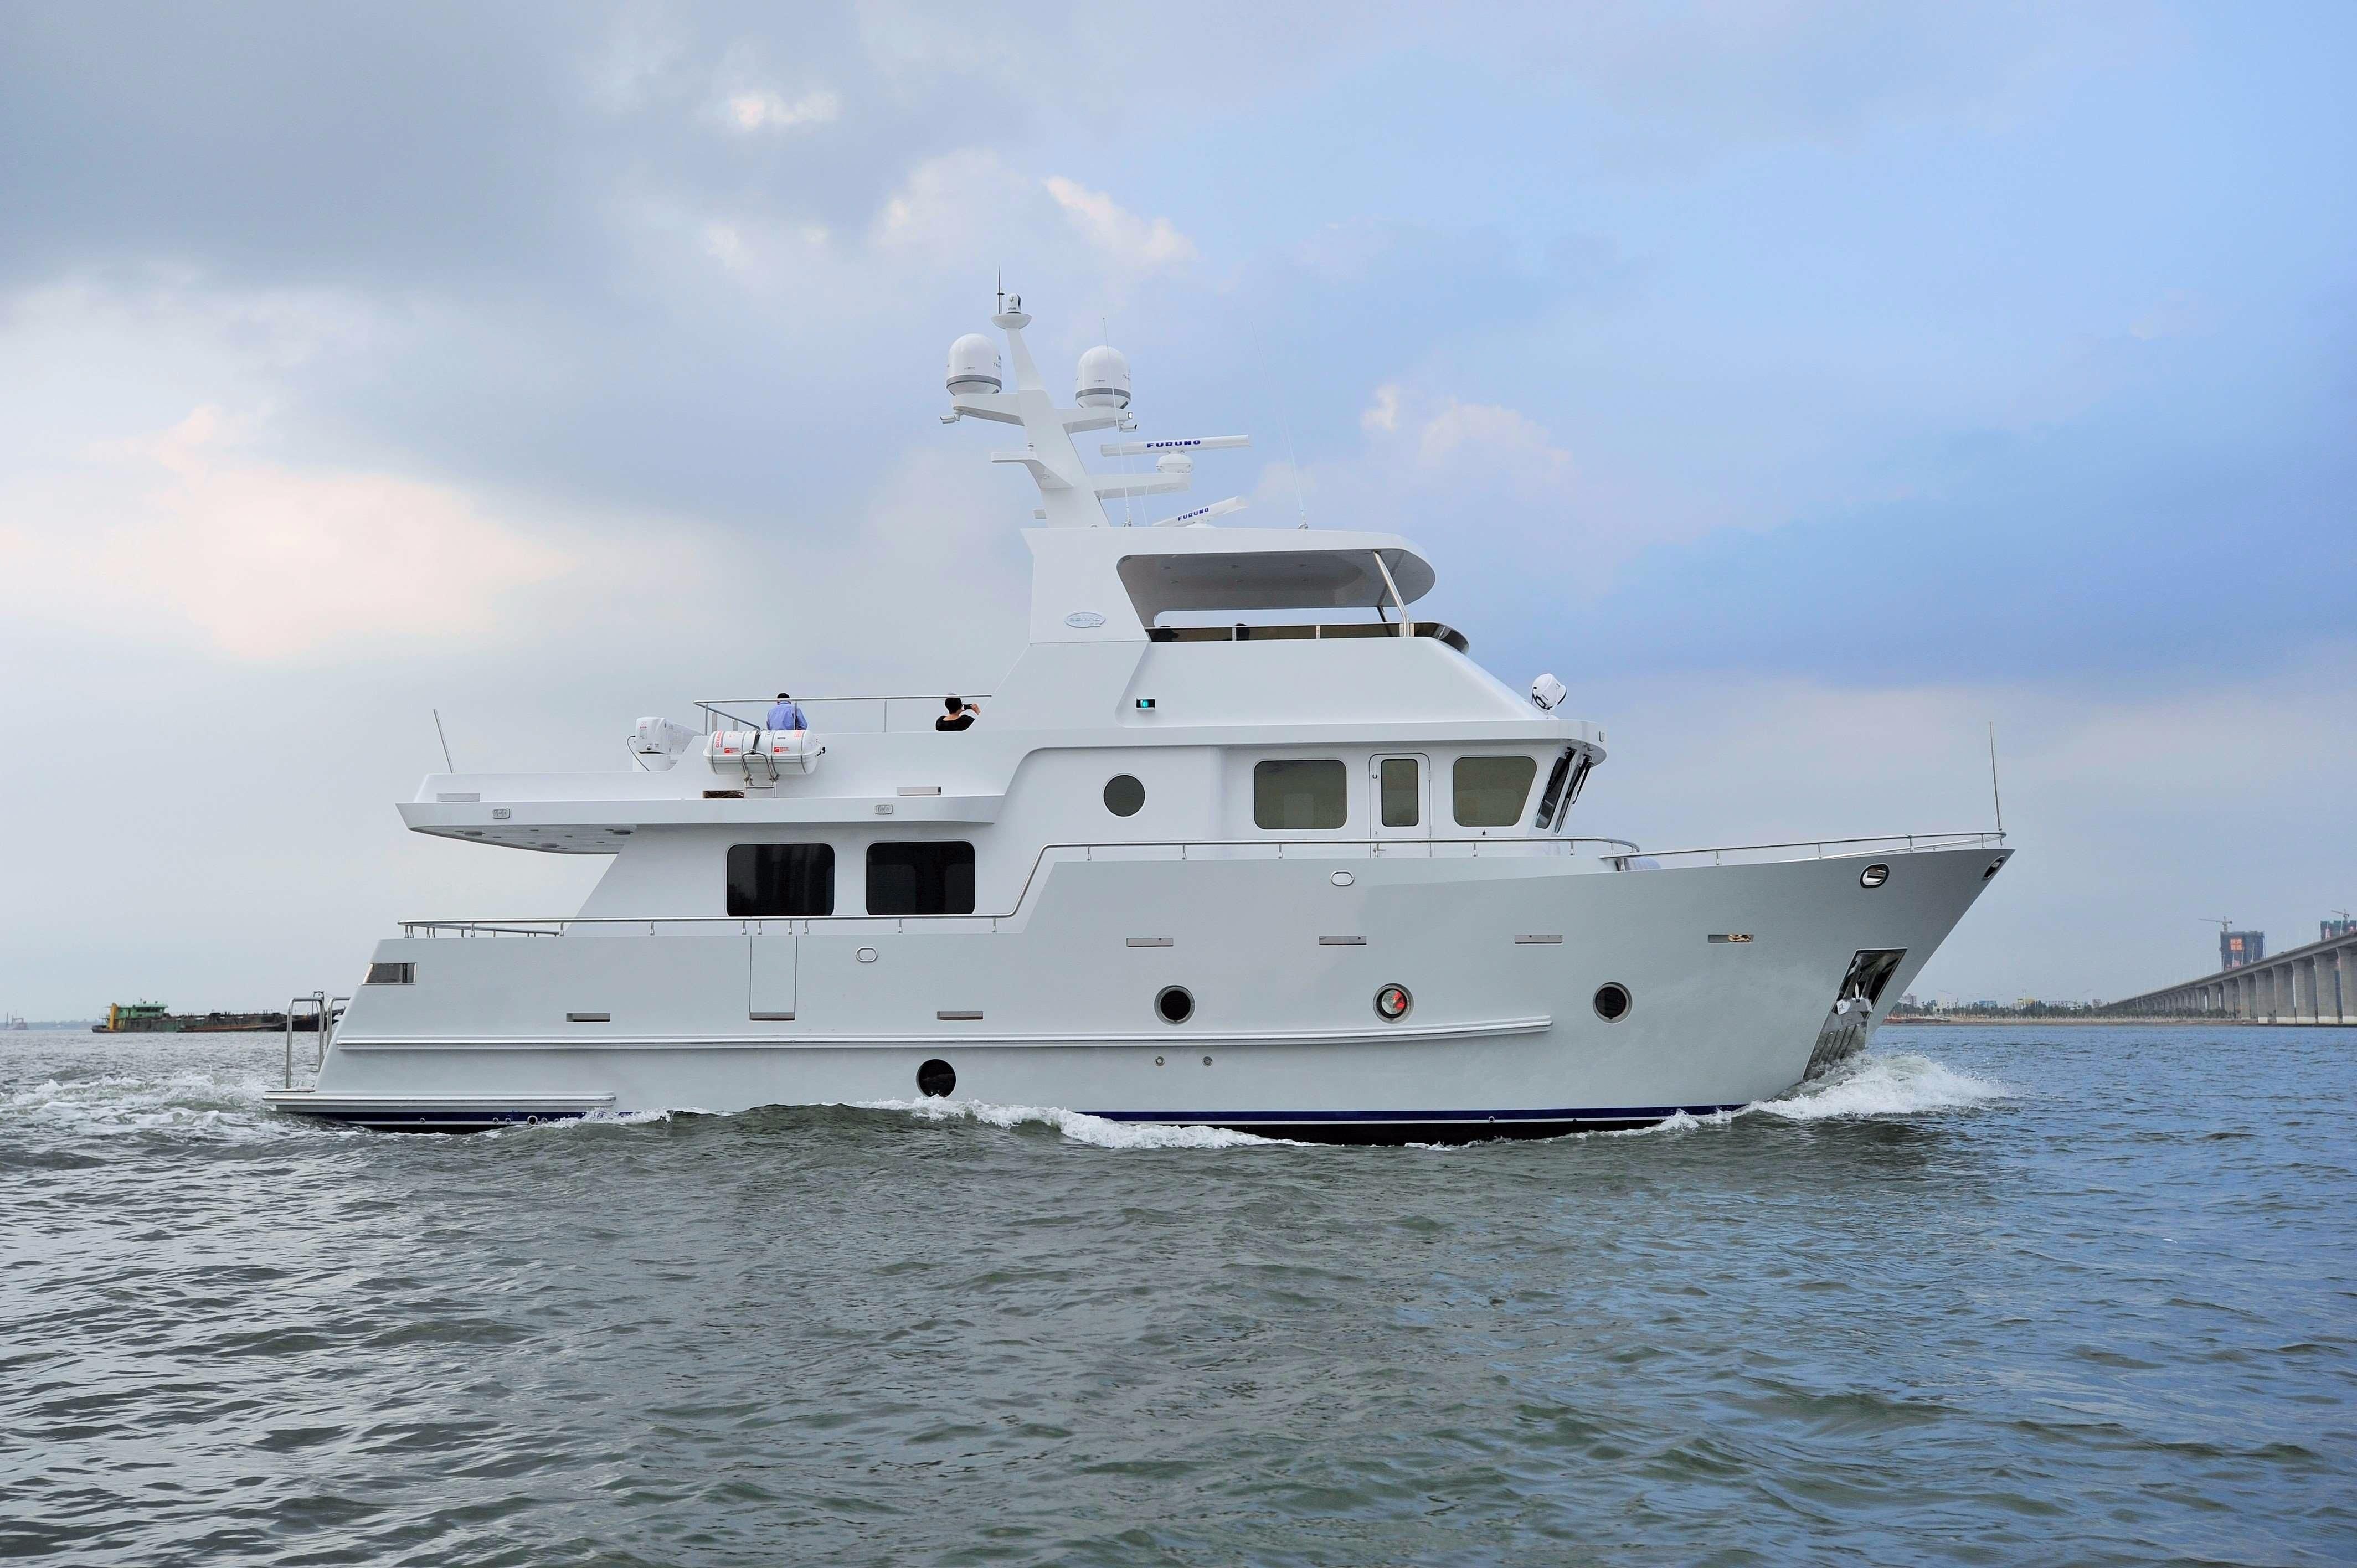 bering 65 yacht for sale uk